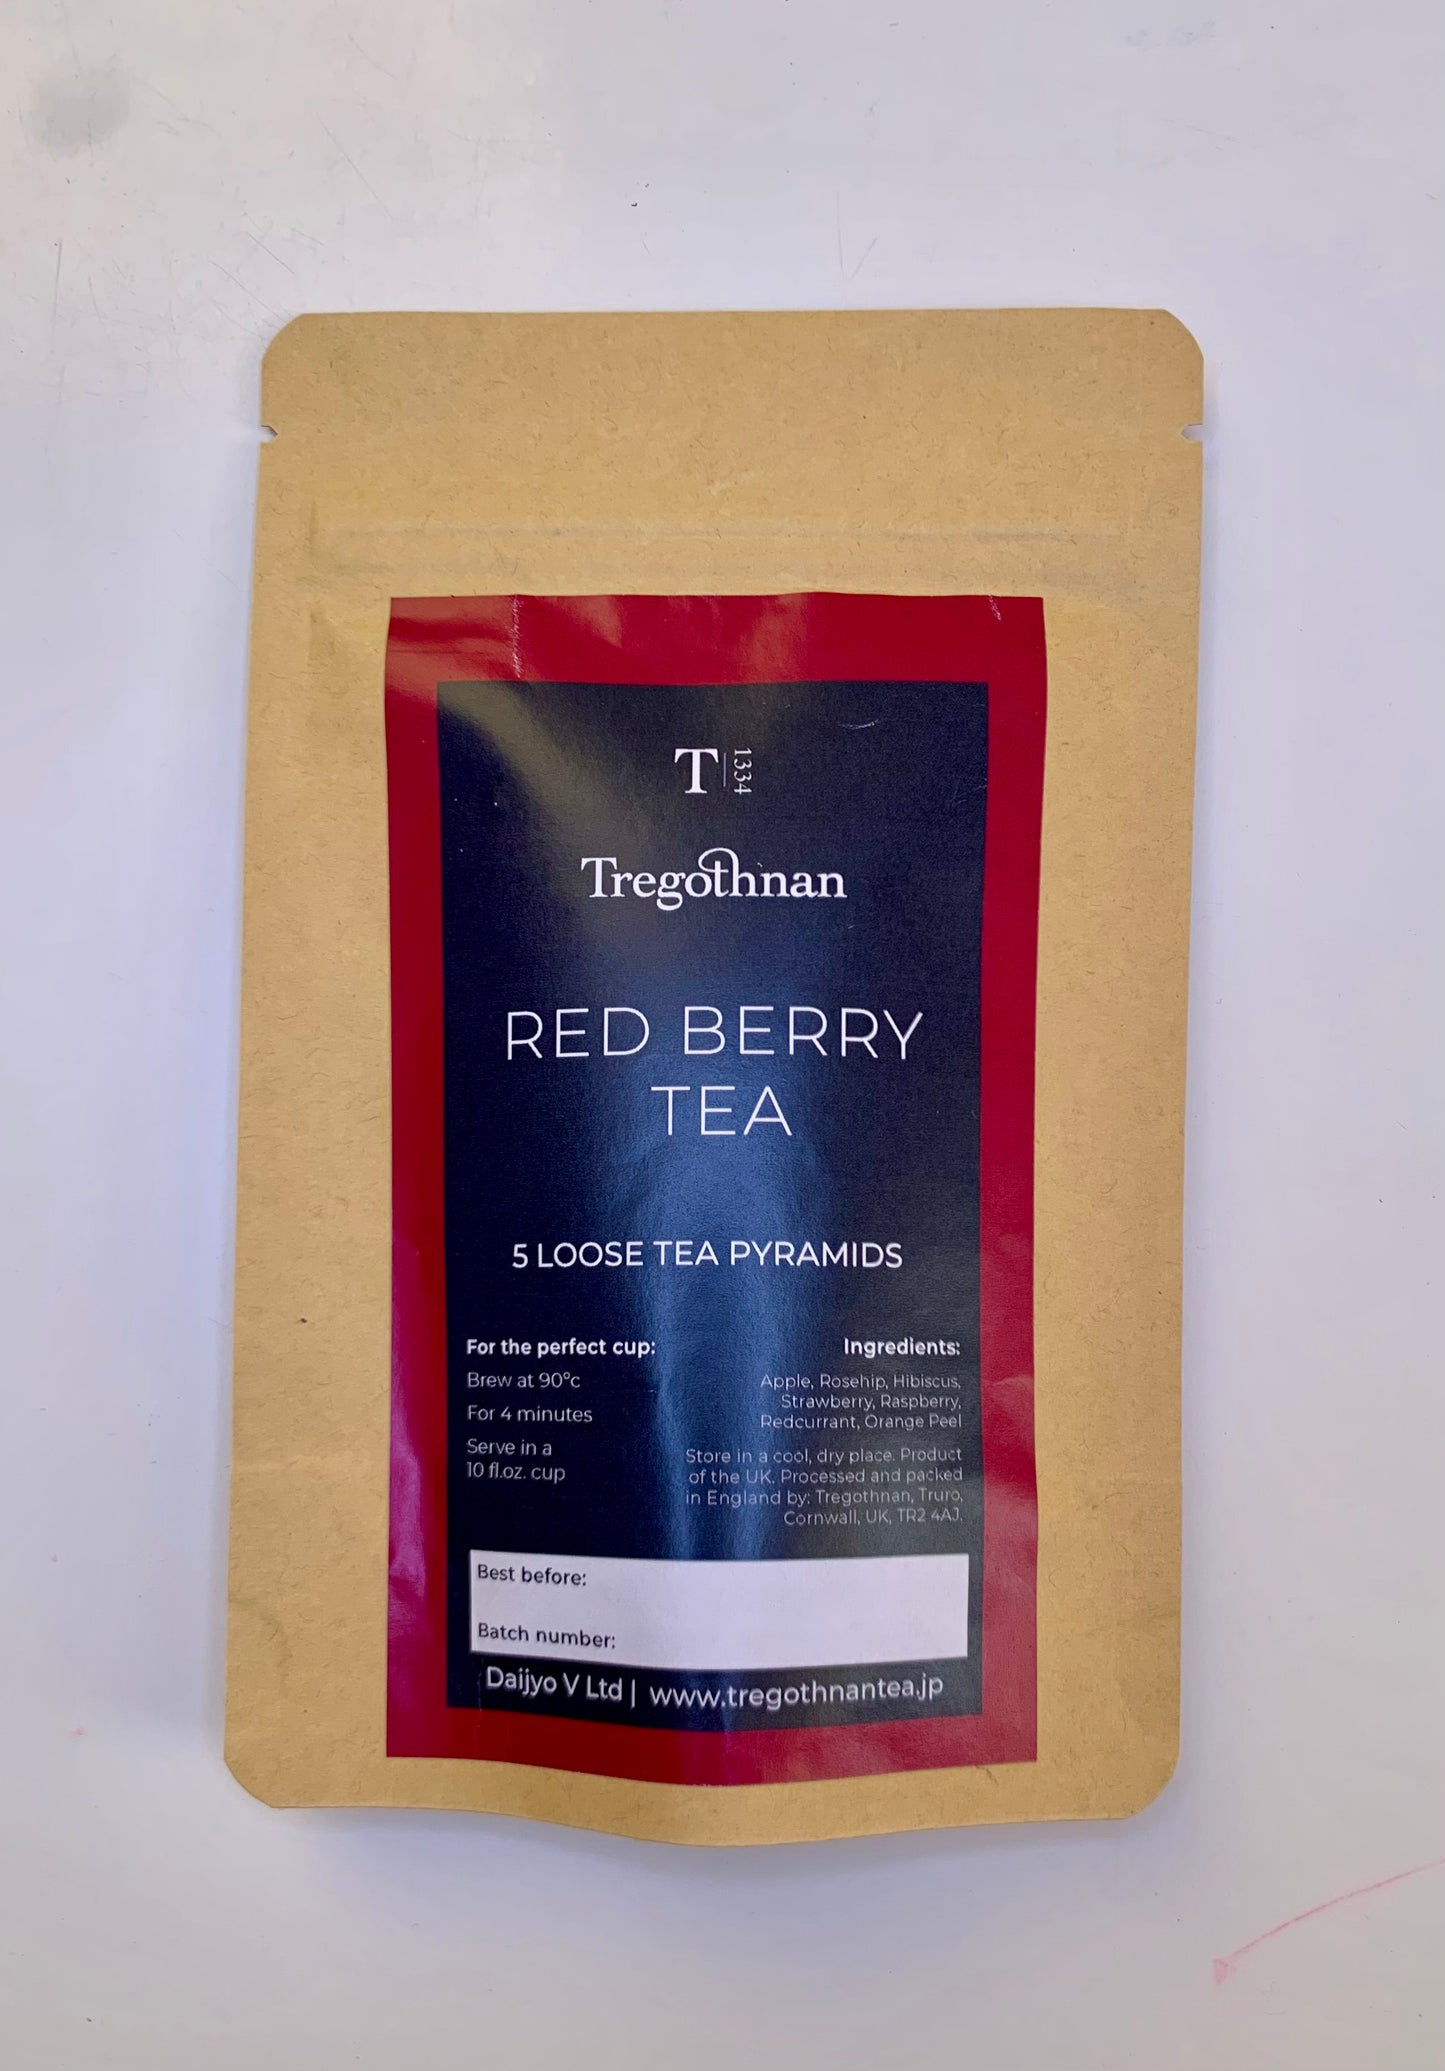 Tregothnan Red Berry tea, 5 loose leaf pyramid pouch on a white background